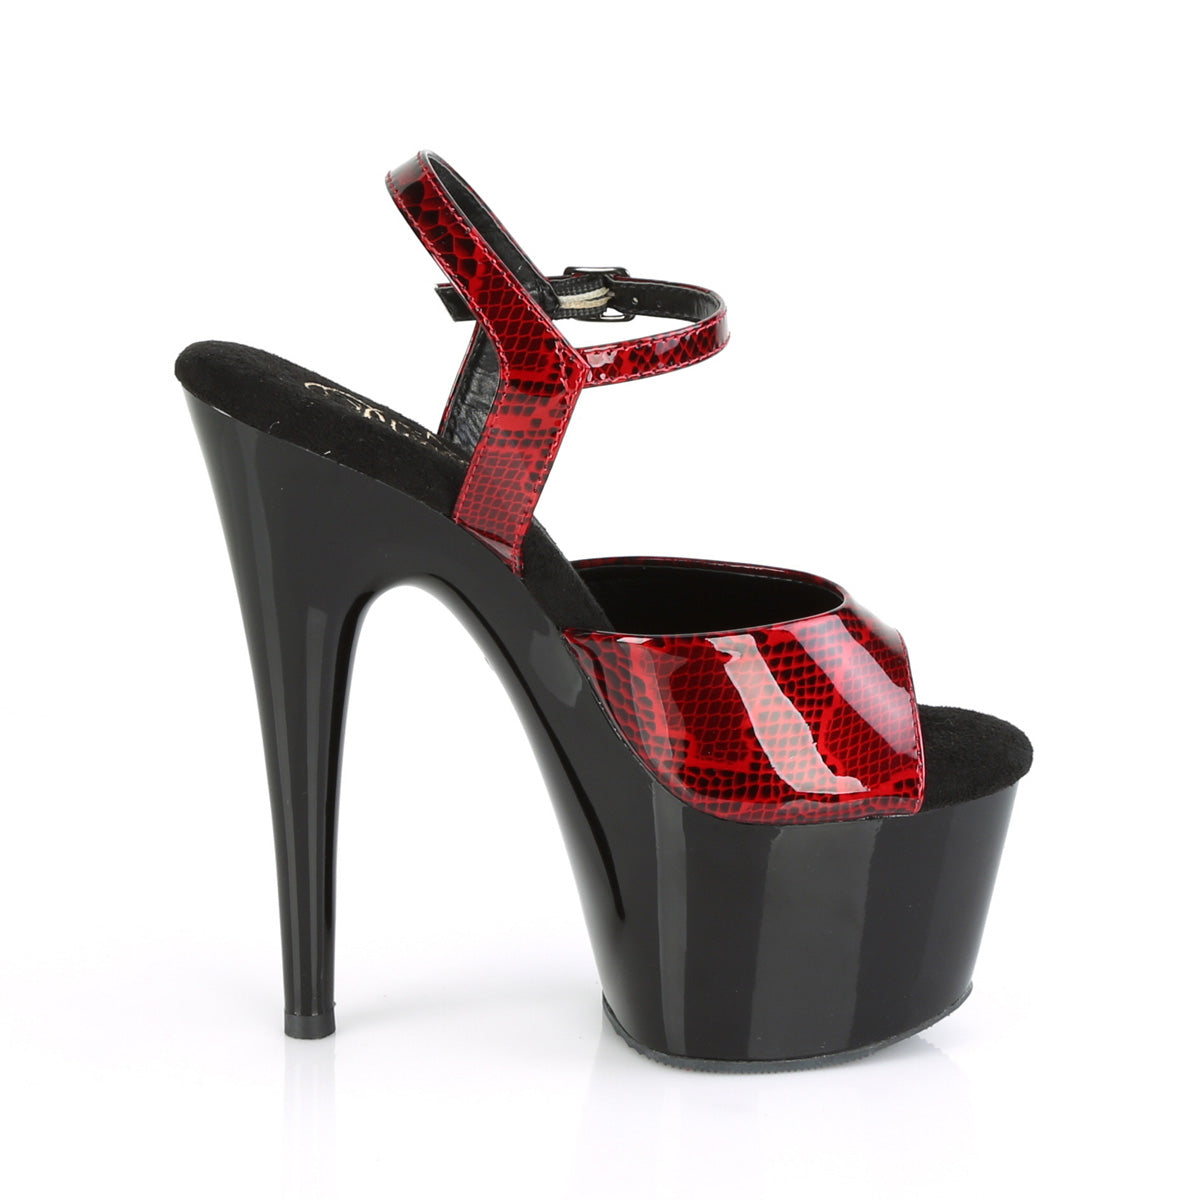 ADORE-709SP / RSPPT / B 7 "PLEASER FAST DELIVERY 24-48h 